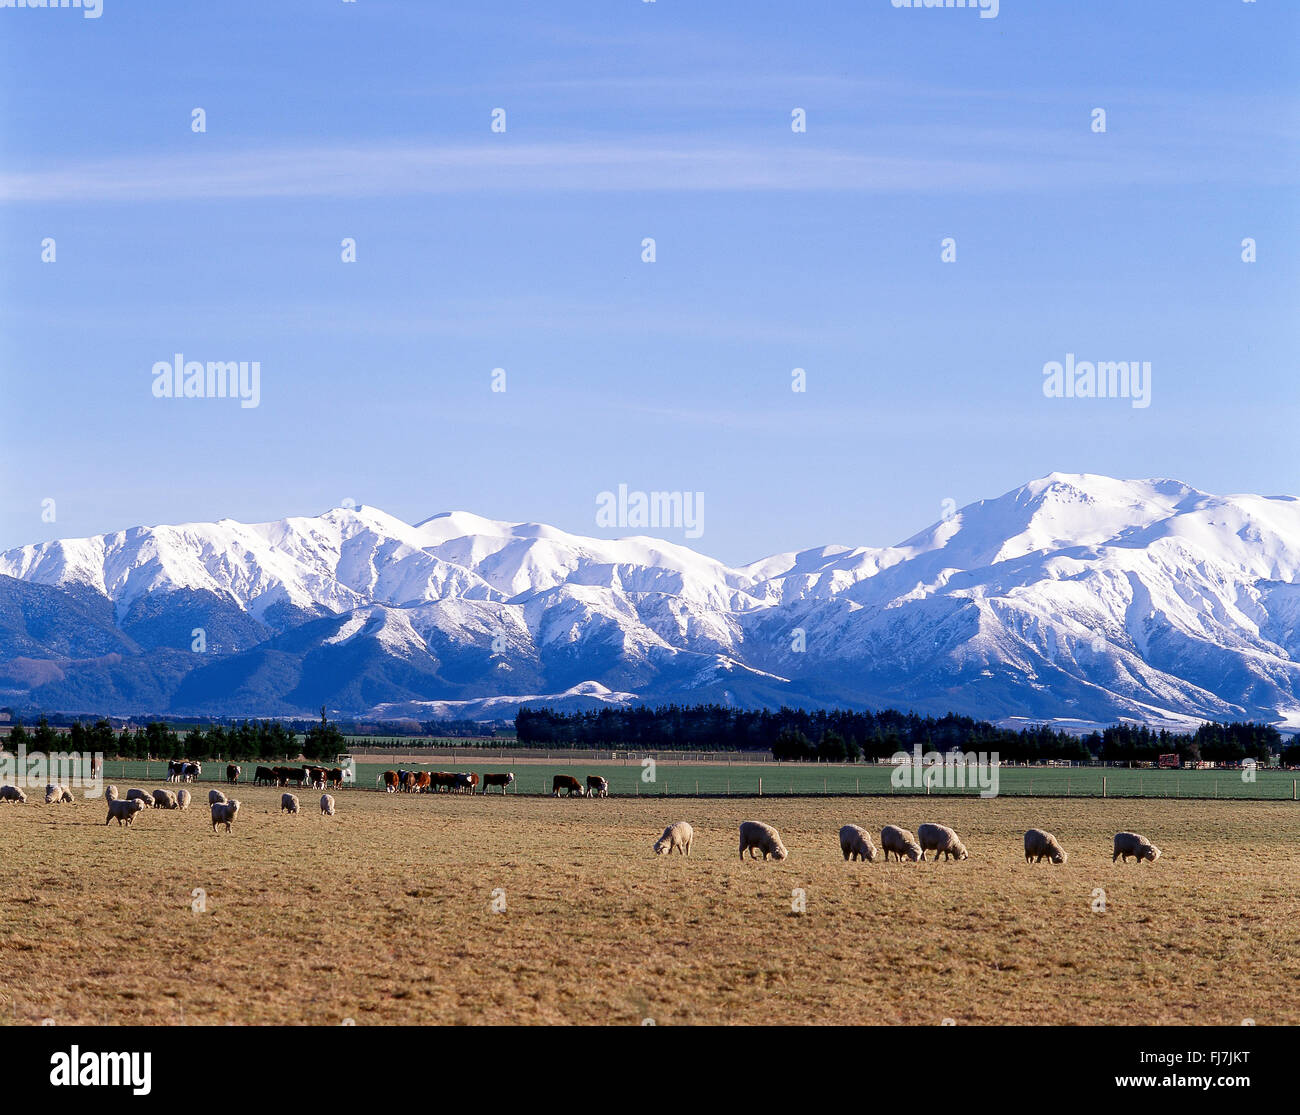 Snow-capped Southern Alps and sheep in pasture, Canterbury Plains, Southern Alps, Canterbury Region, South Island, New Zealand Stock Photo